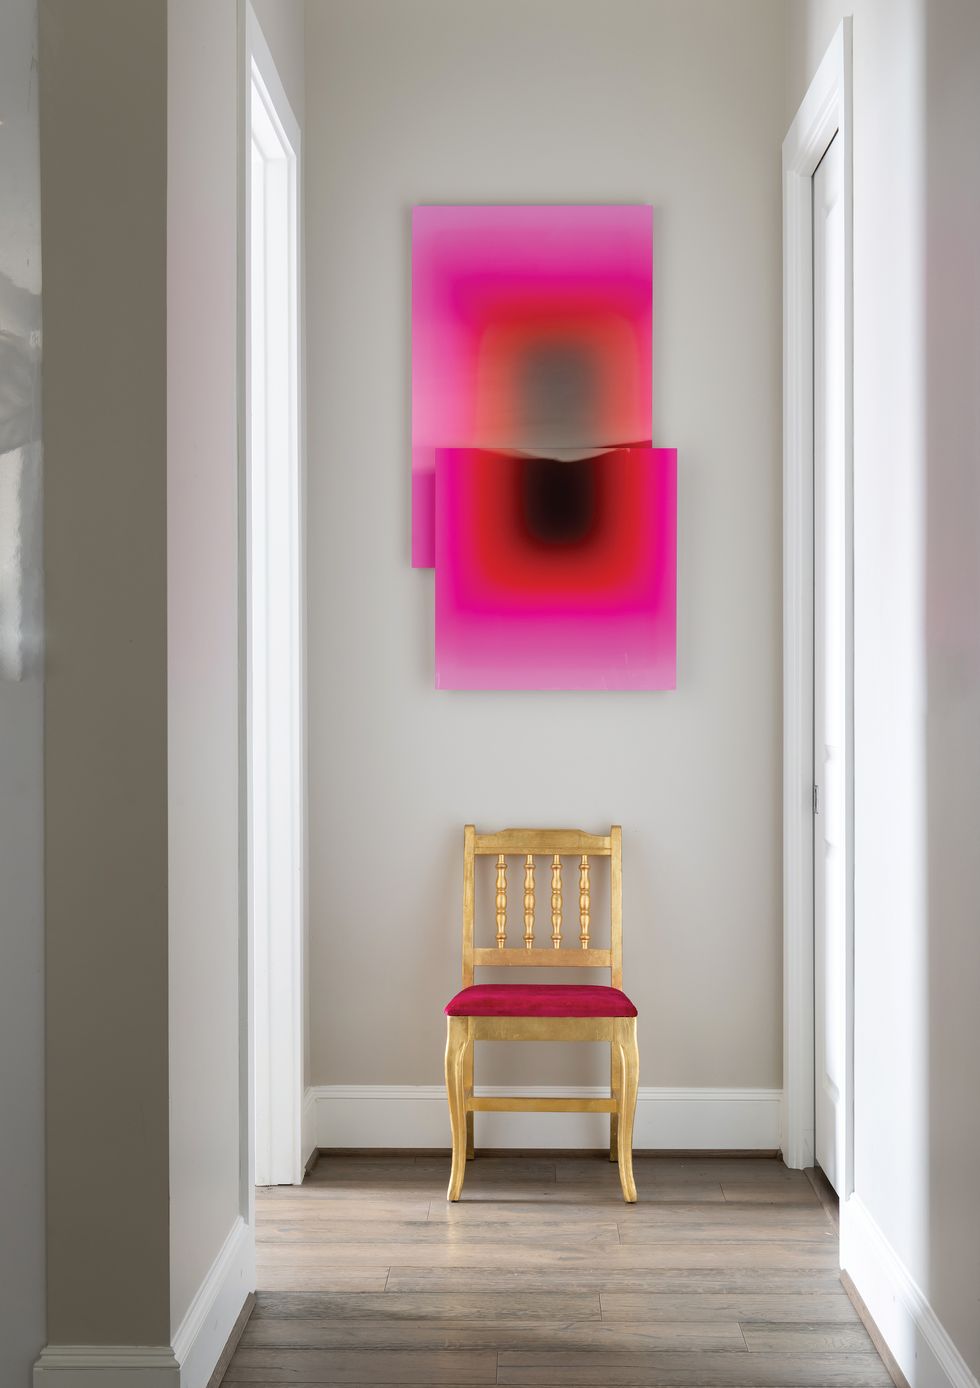 A pink acrylic floating panel hangs above a vintage chair that was redesigned by Pugh to become part of the art